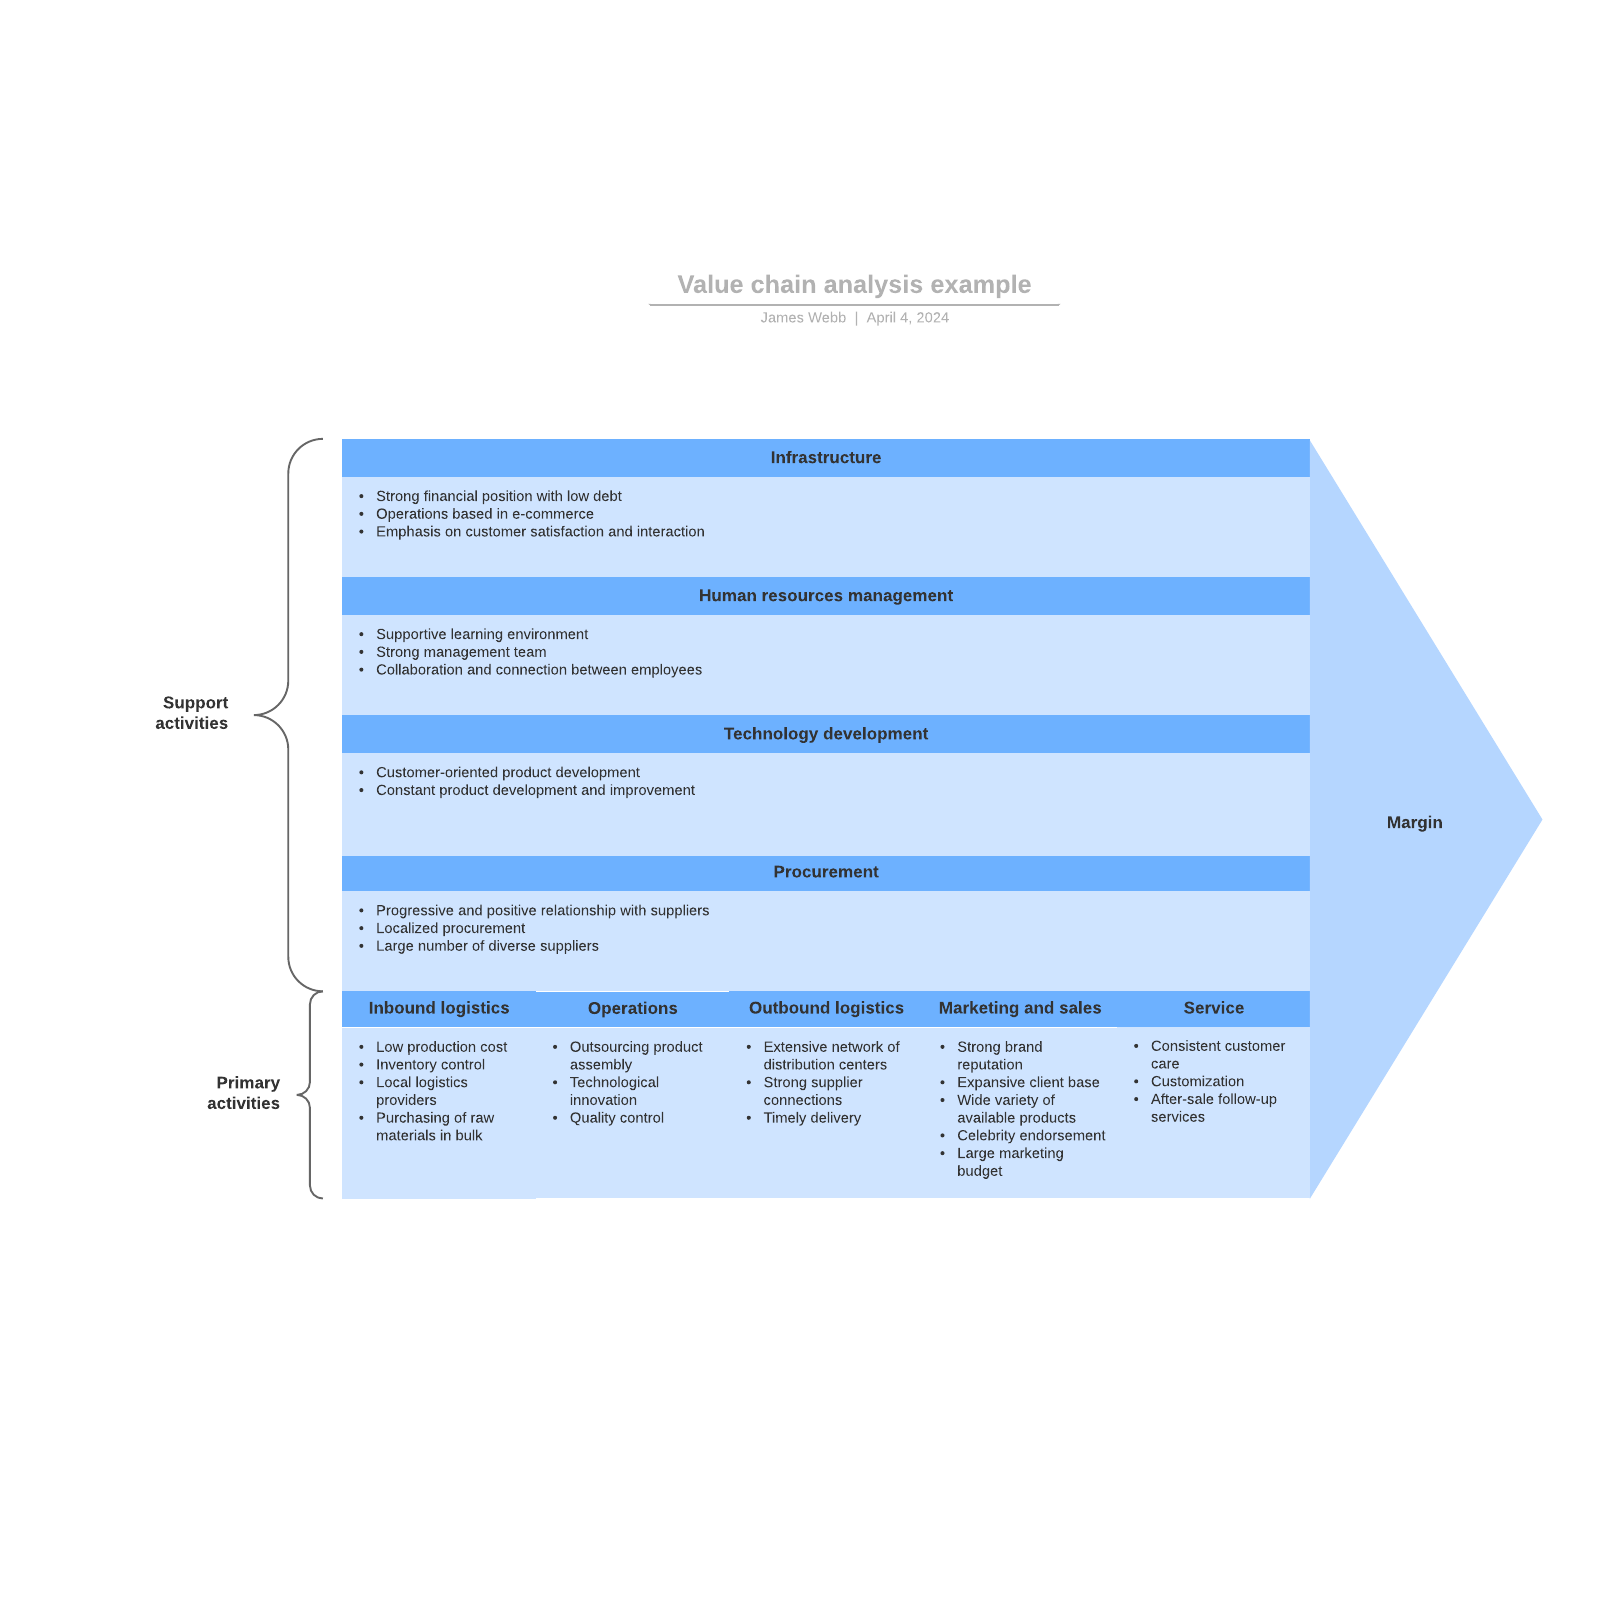 Value chain analysis example example